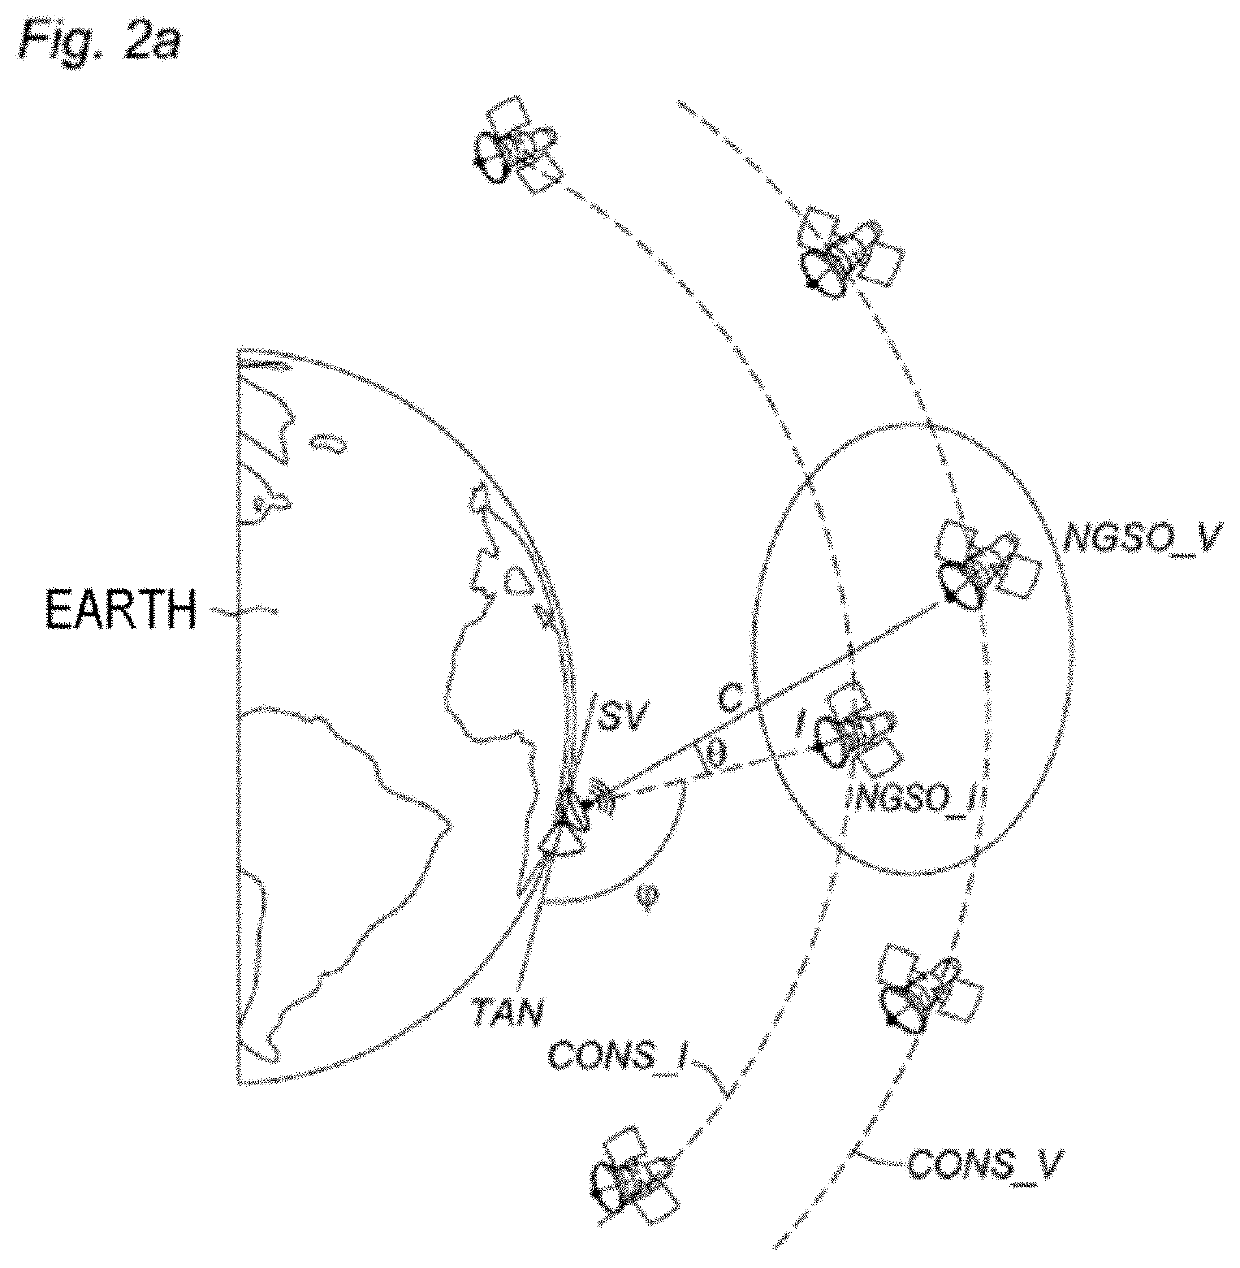 Method for determining constraints of a non-geostationary system with respect to another non-geostationary system